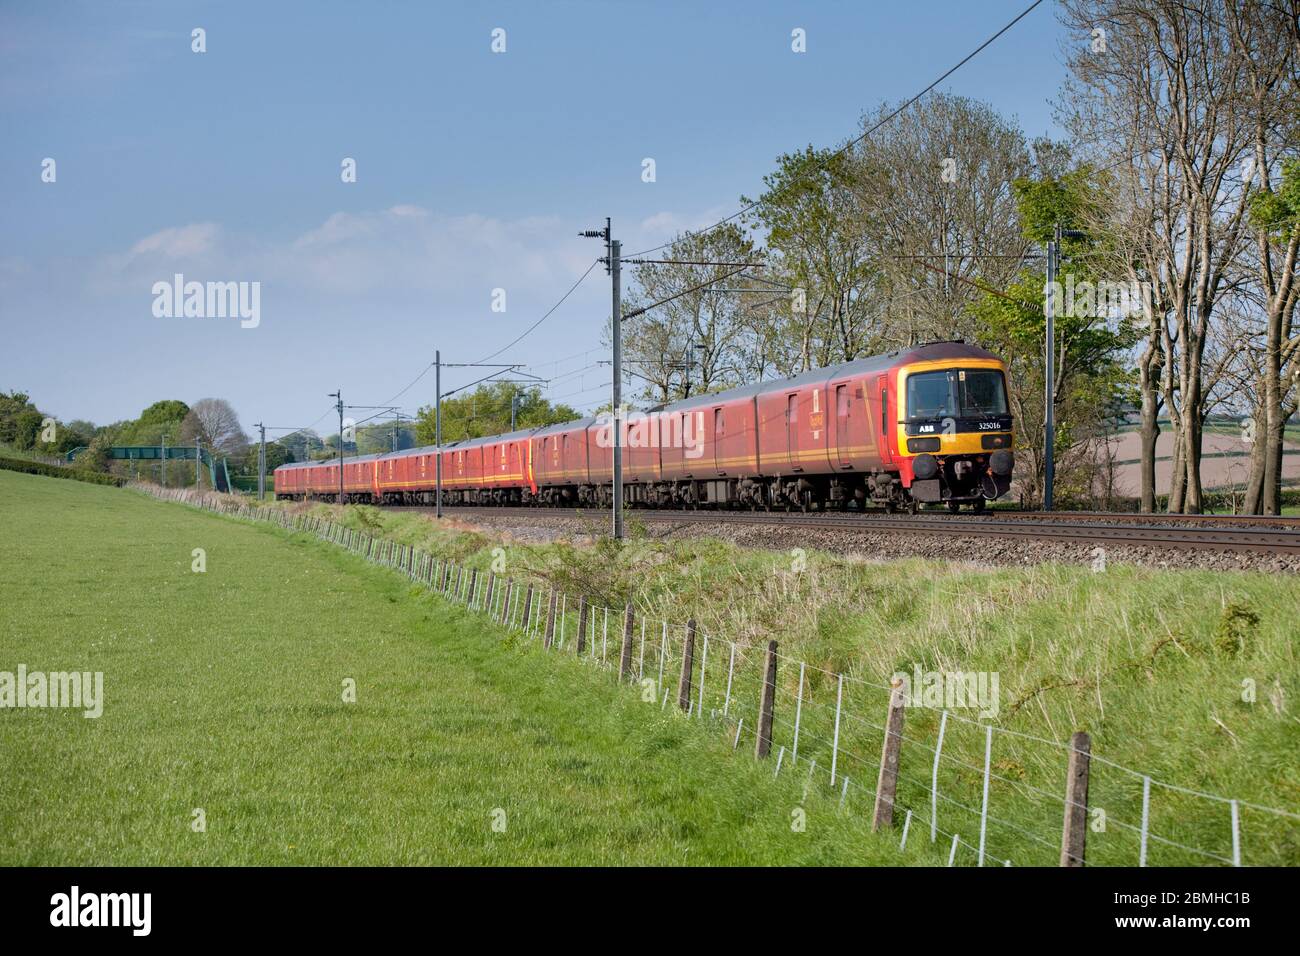 3 Royal Mail Class 325 postal trains pass Wellheads (north of Carnforth) on the scenic west coast mainline in Cumbria with a mail train Stock Photo